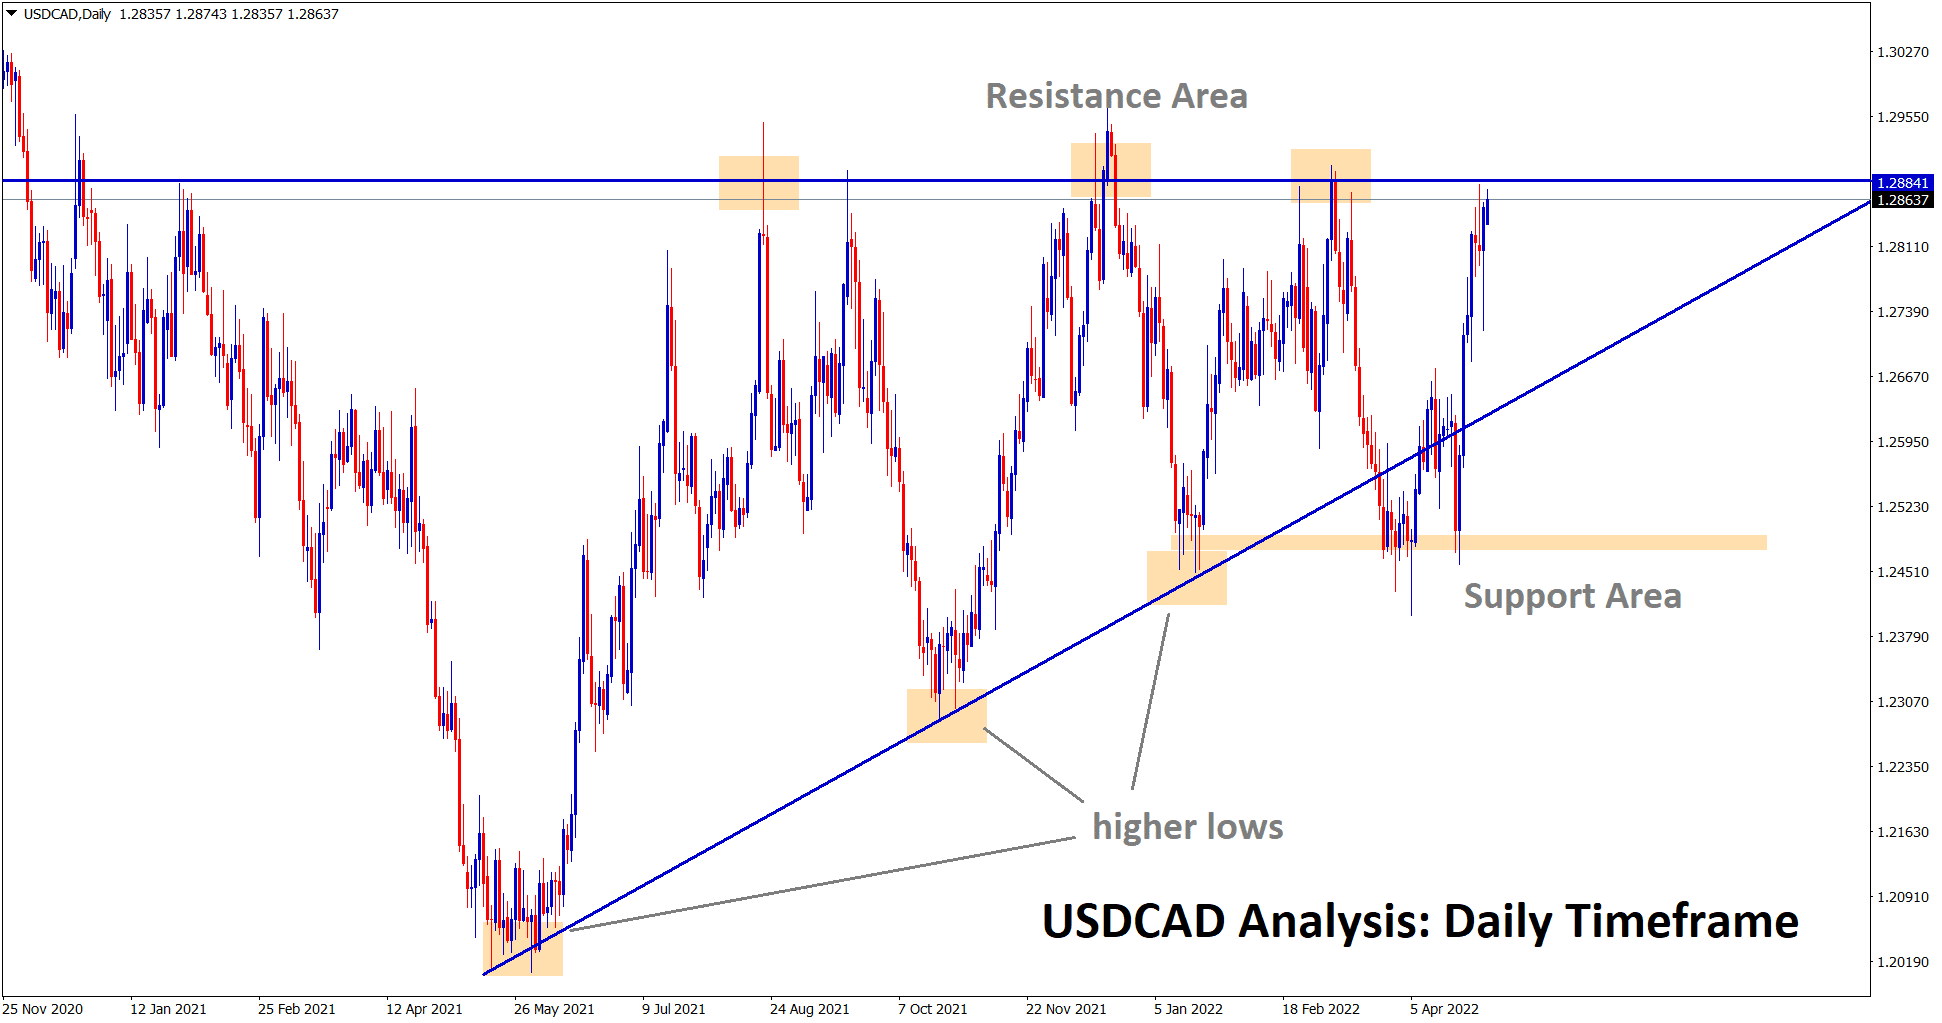 USDCAD has reached the resistance area in the daily timeframe